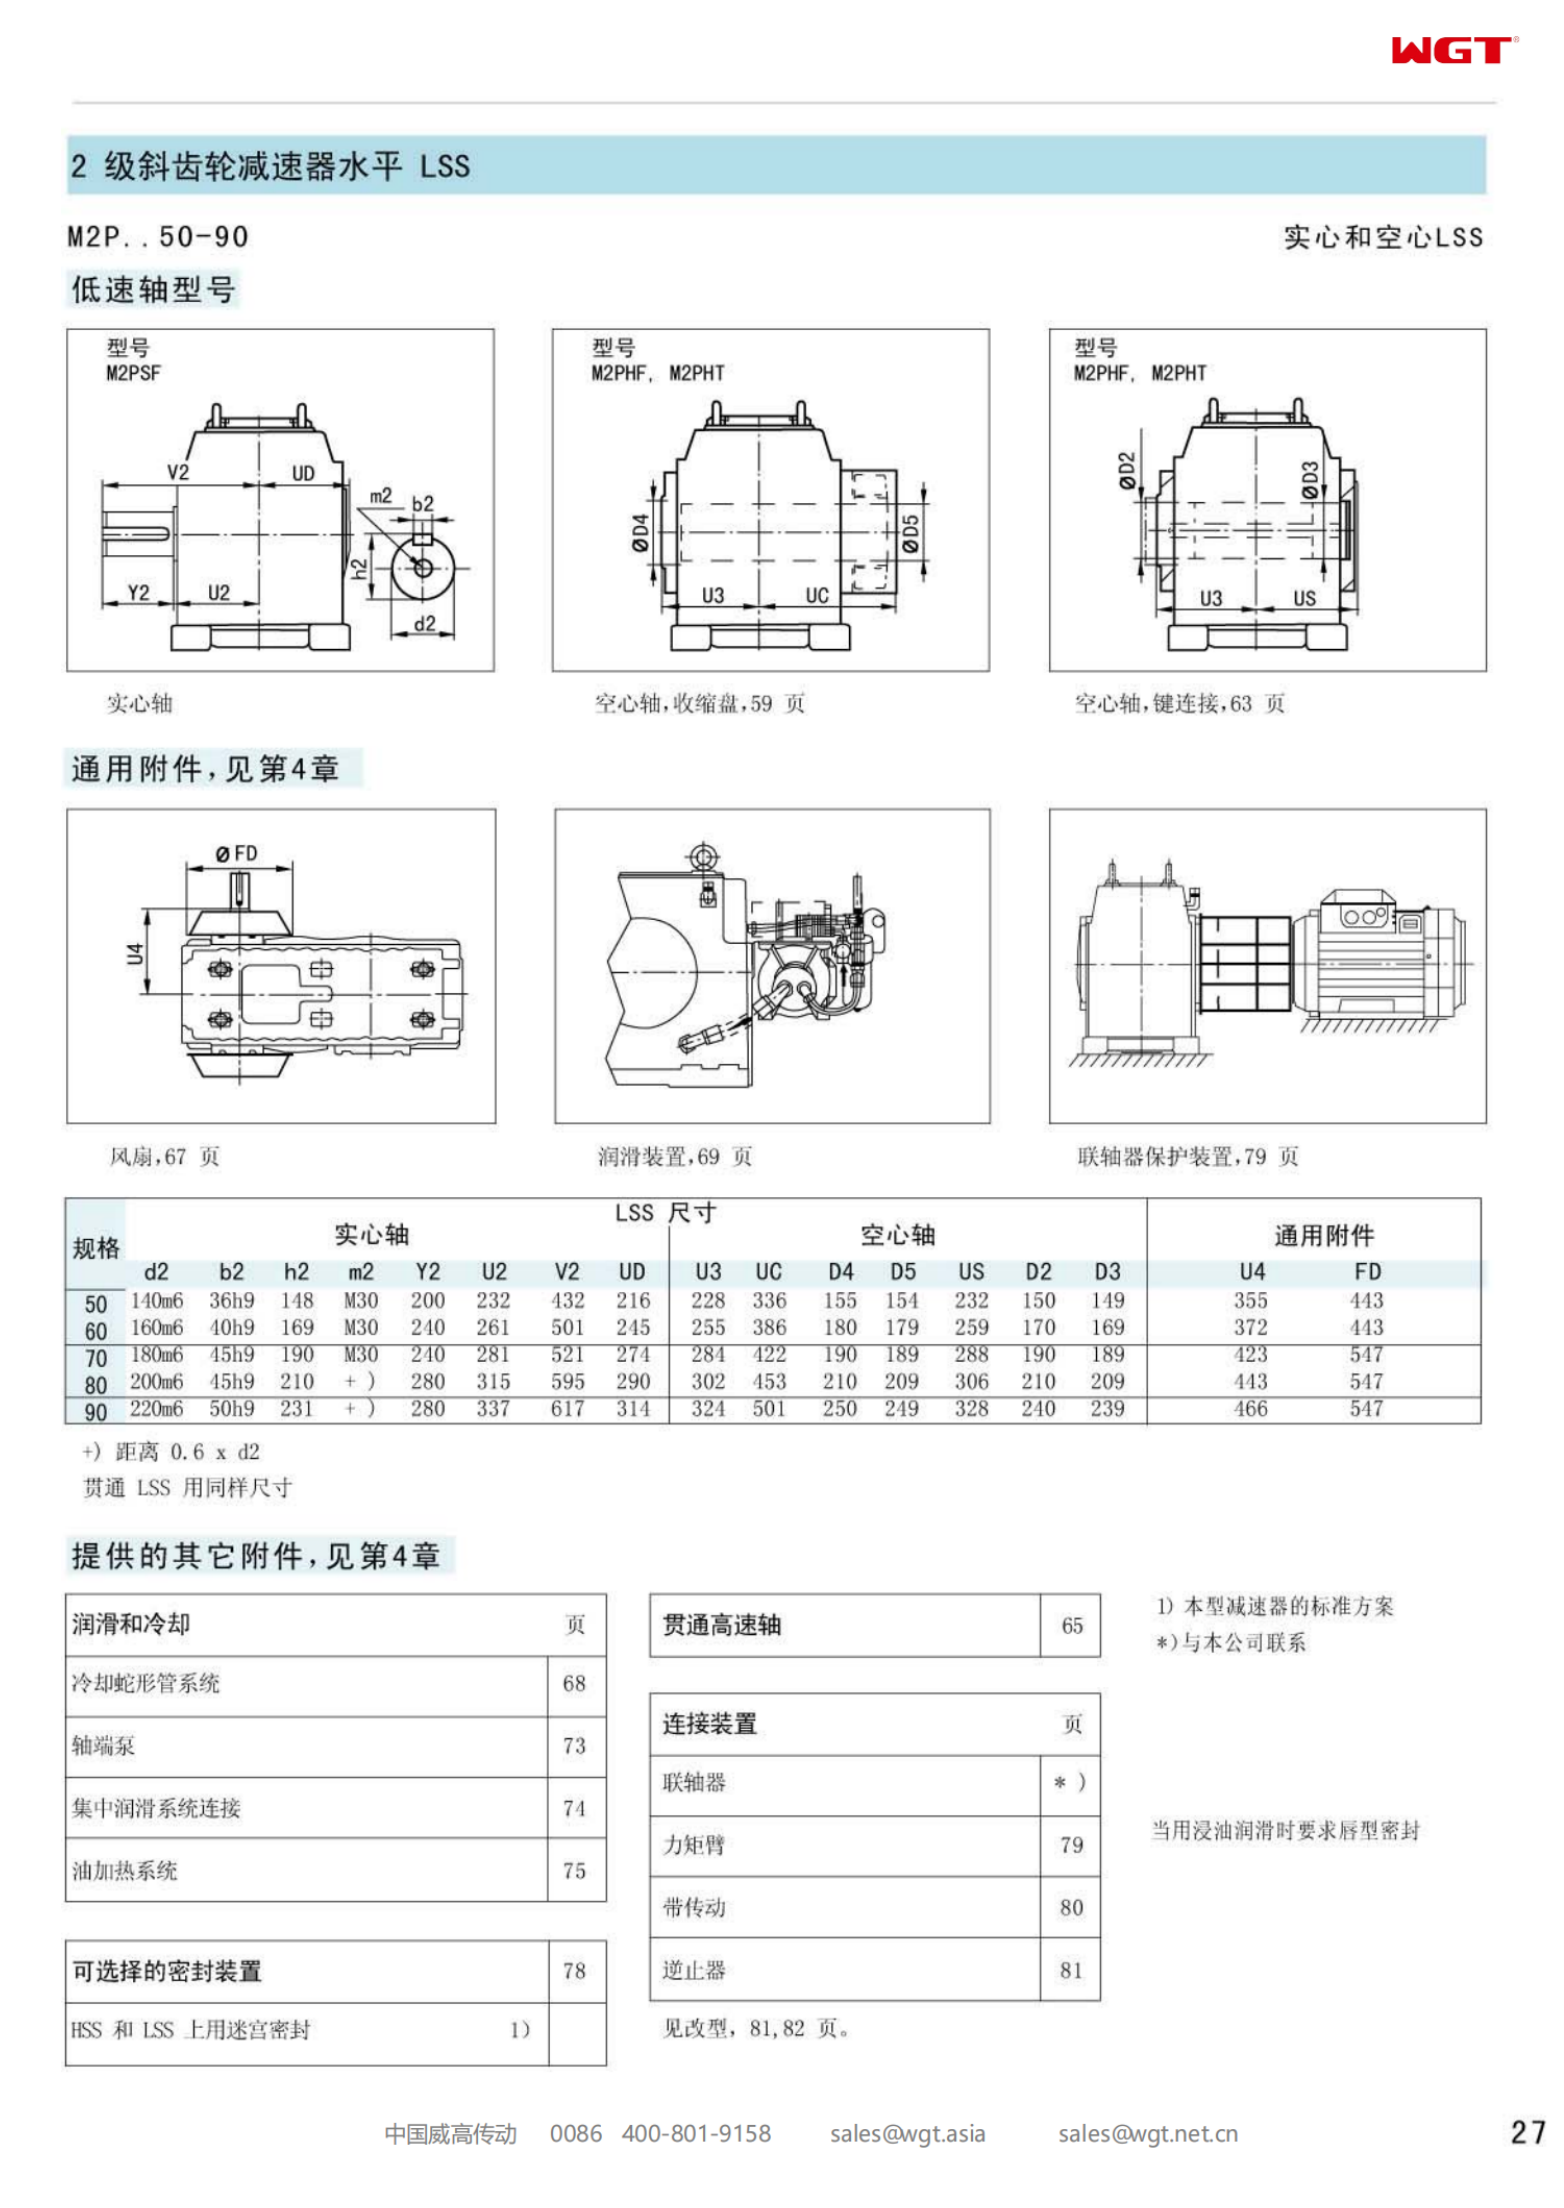 M2PSF90 Replace_SEW_M_Series Gearbox